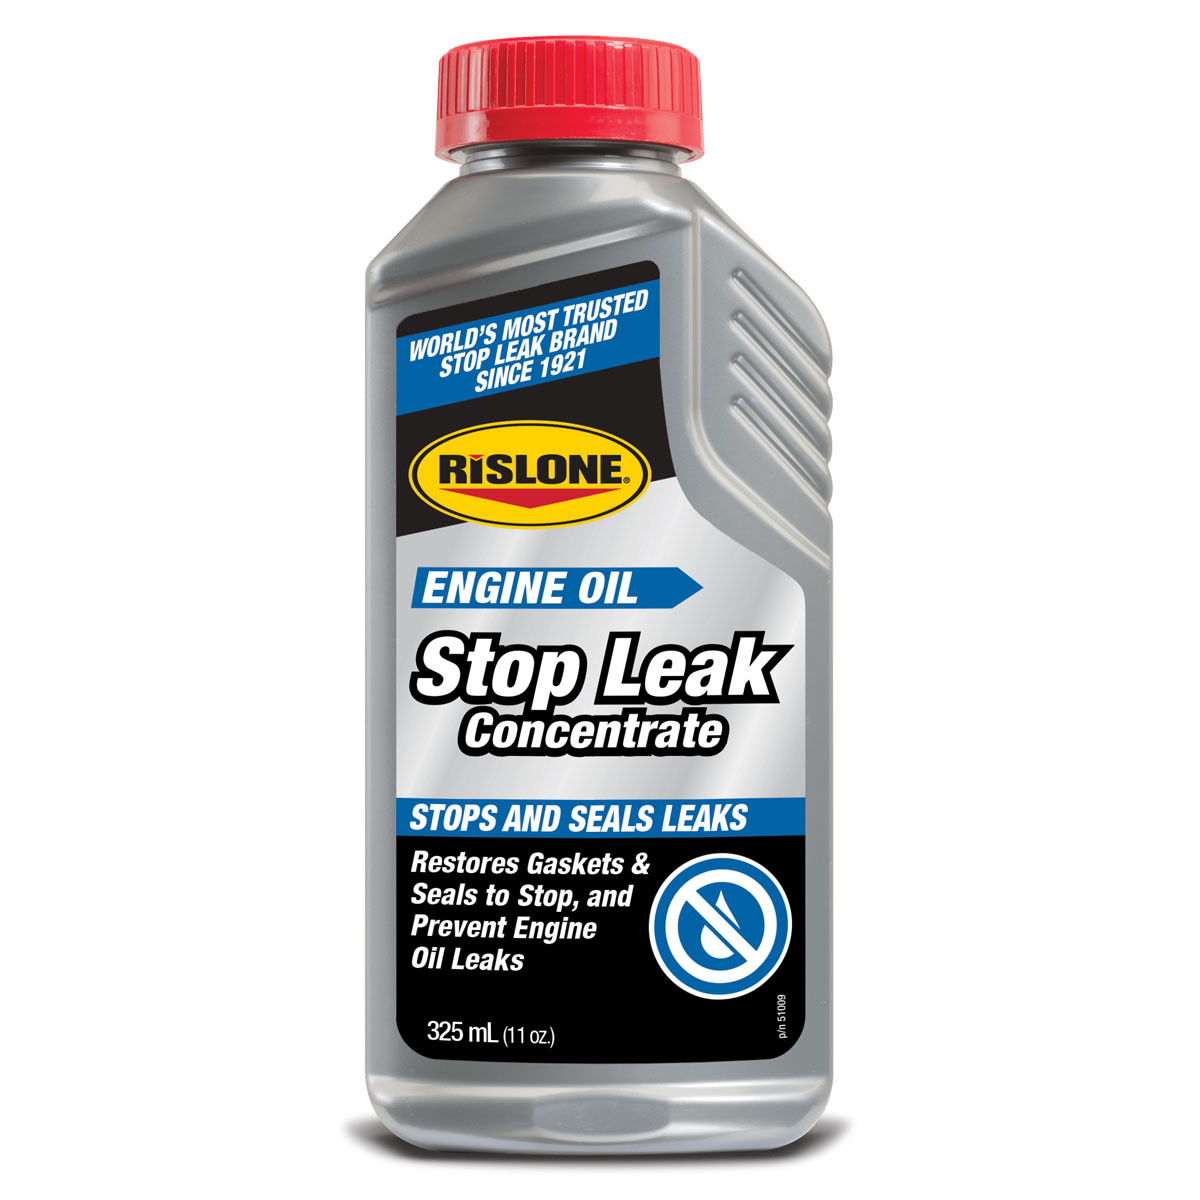 Rislone Engine Oil Stop Leak Concentrate 325ml